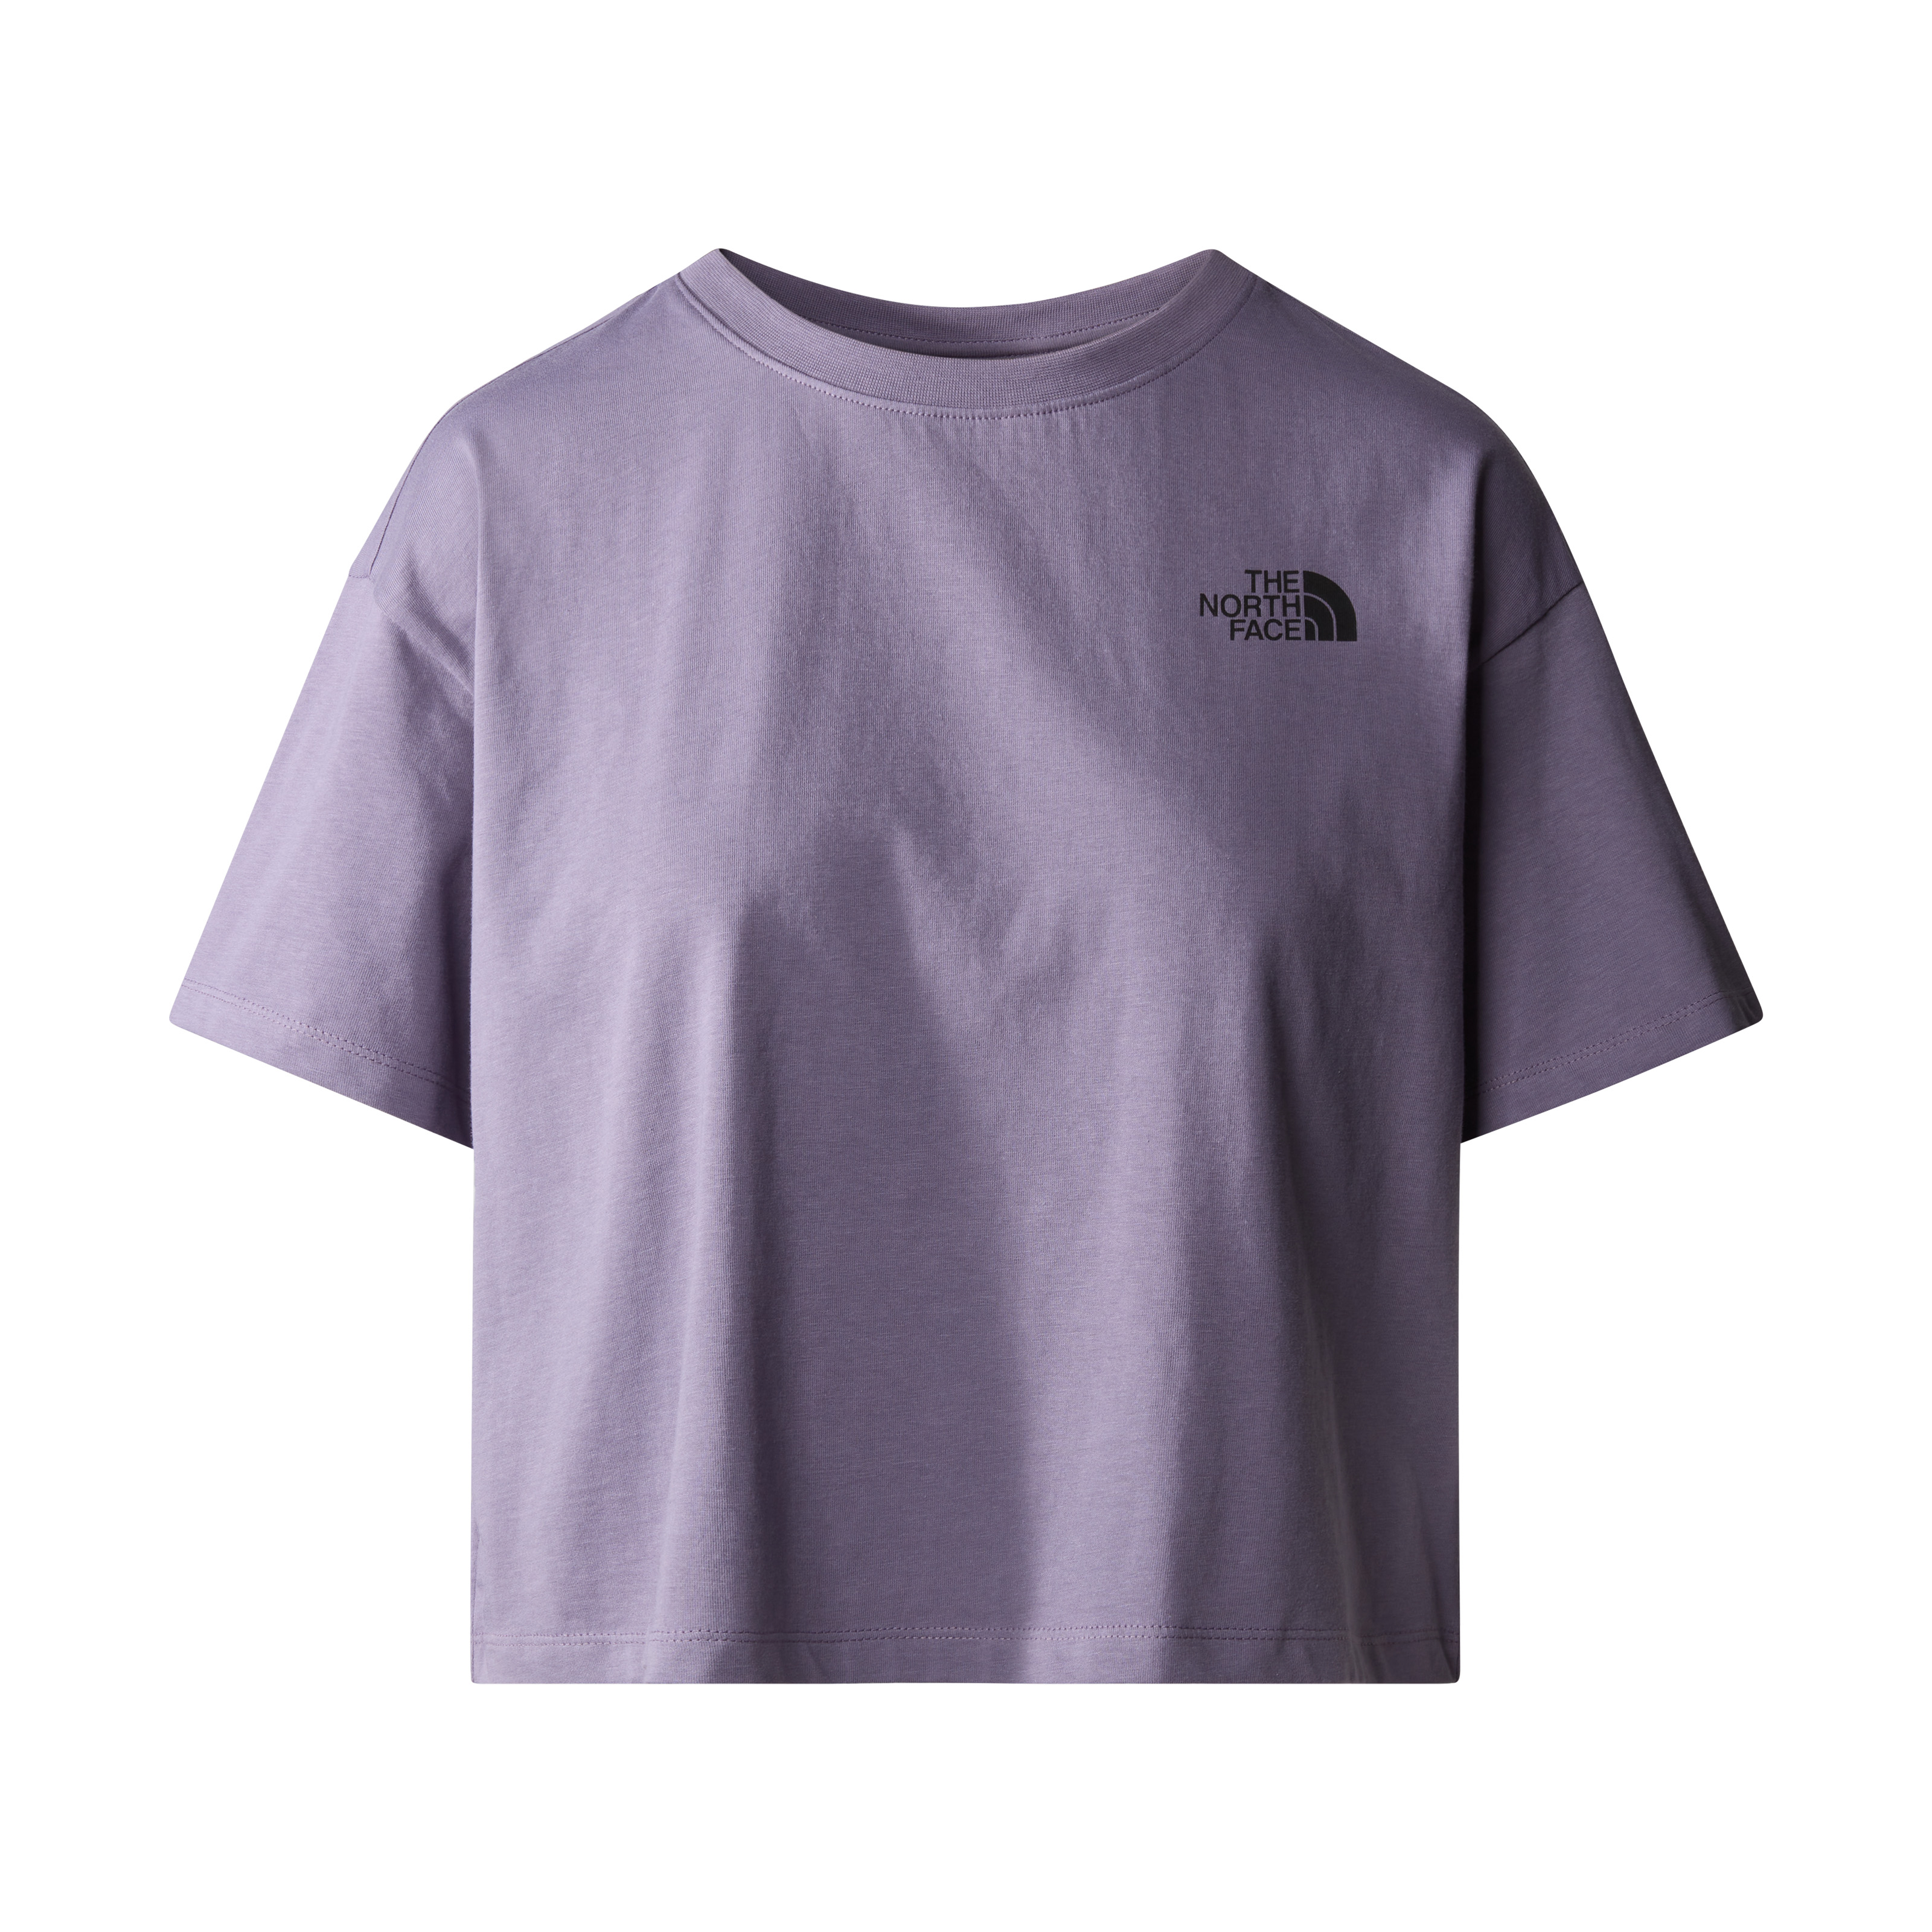 The North | Tee 196249630686 Face n141_lunar_slate 2023 Dome | Cropped S W | Simple